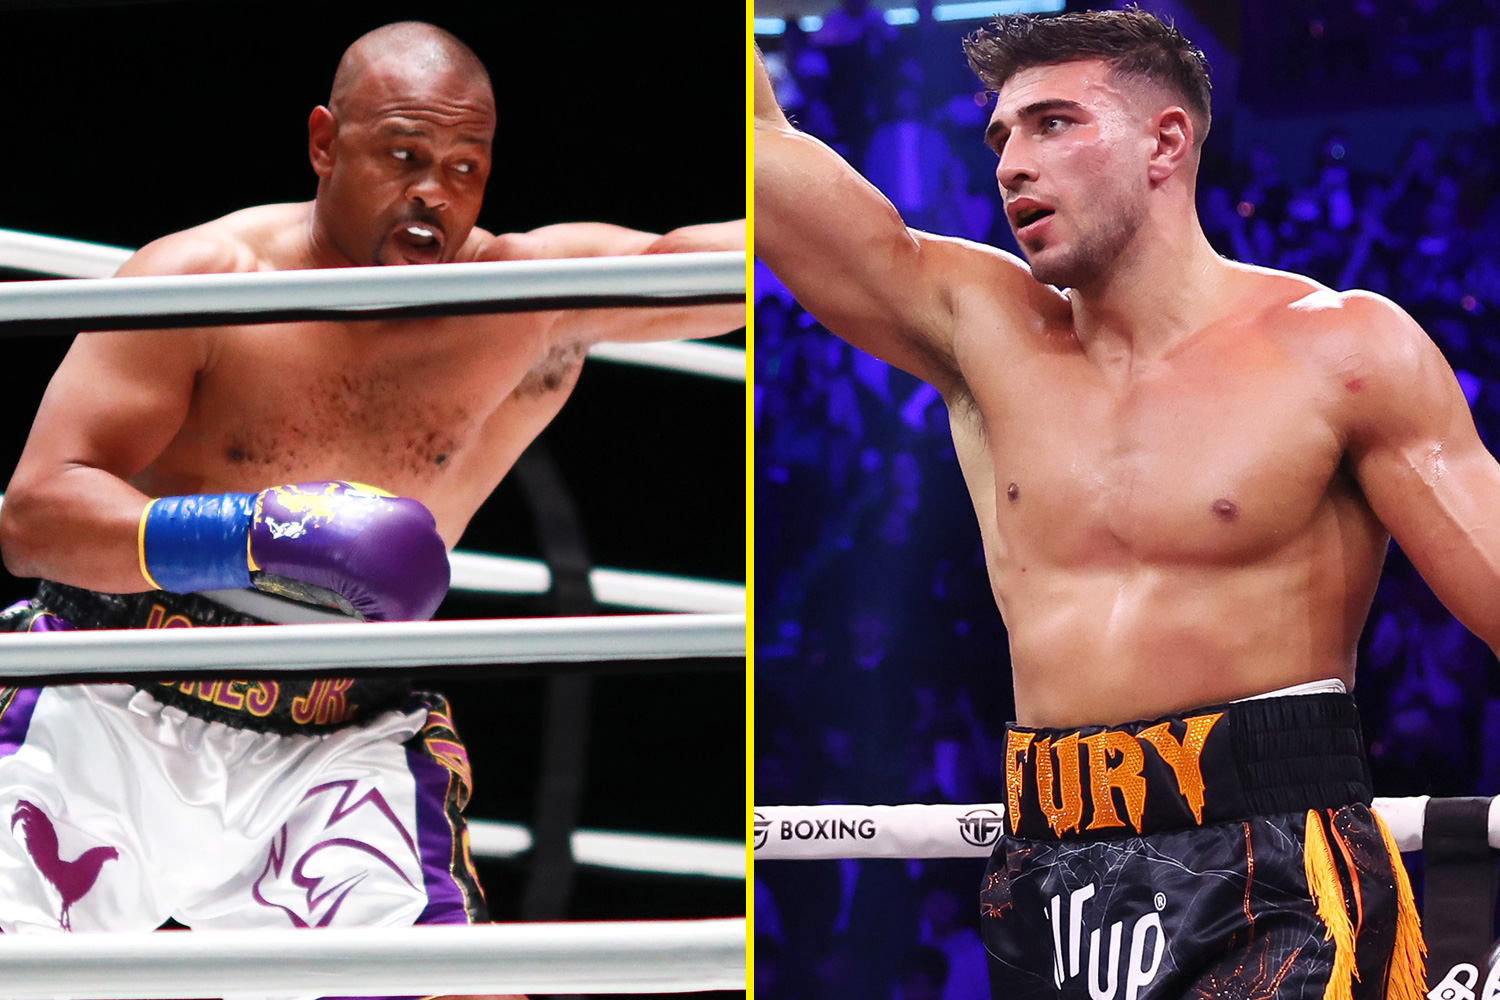 Roy Jones Jr. is looking for Tommy Fury as his new opponent.